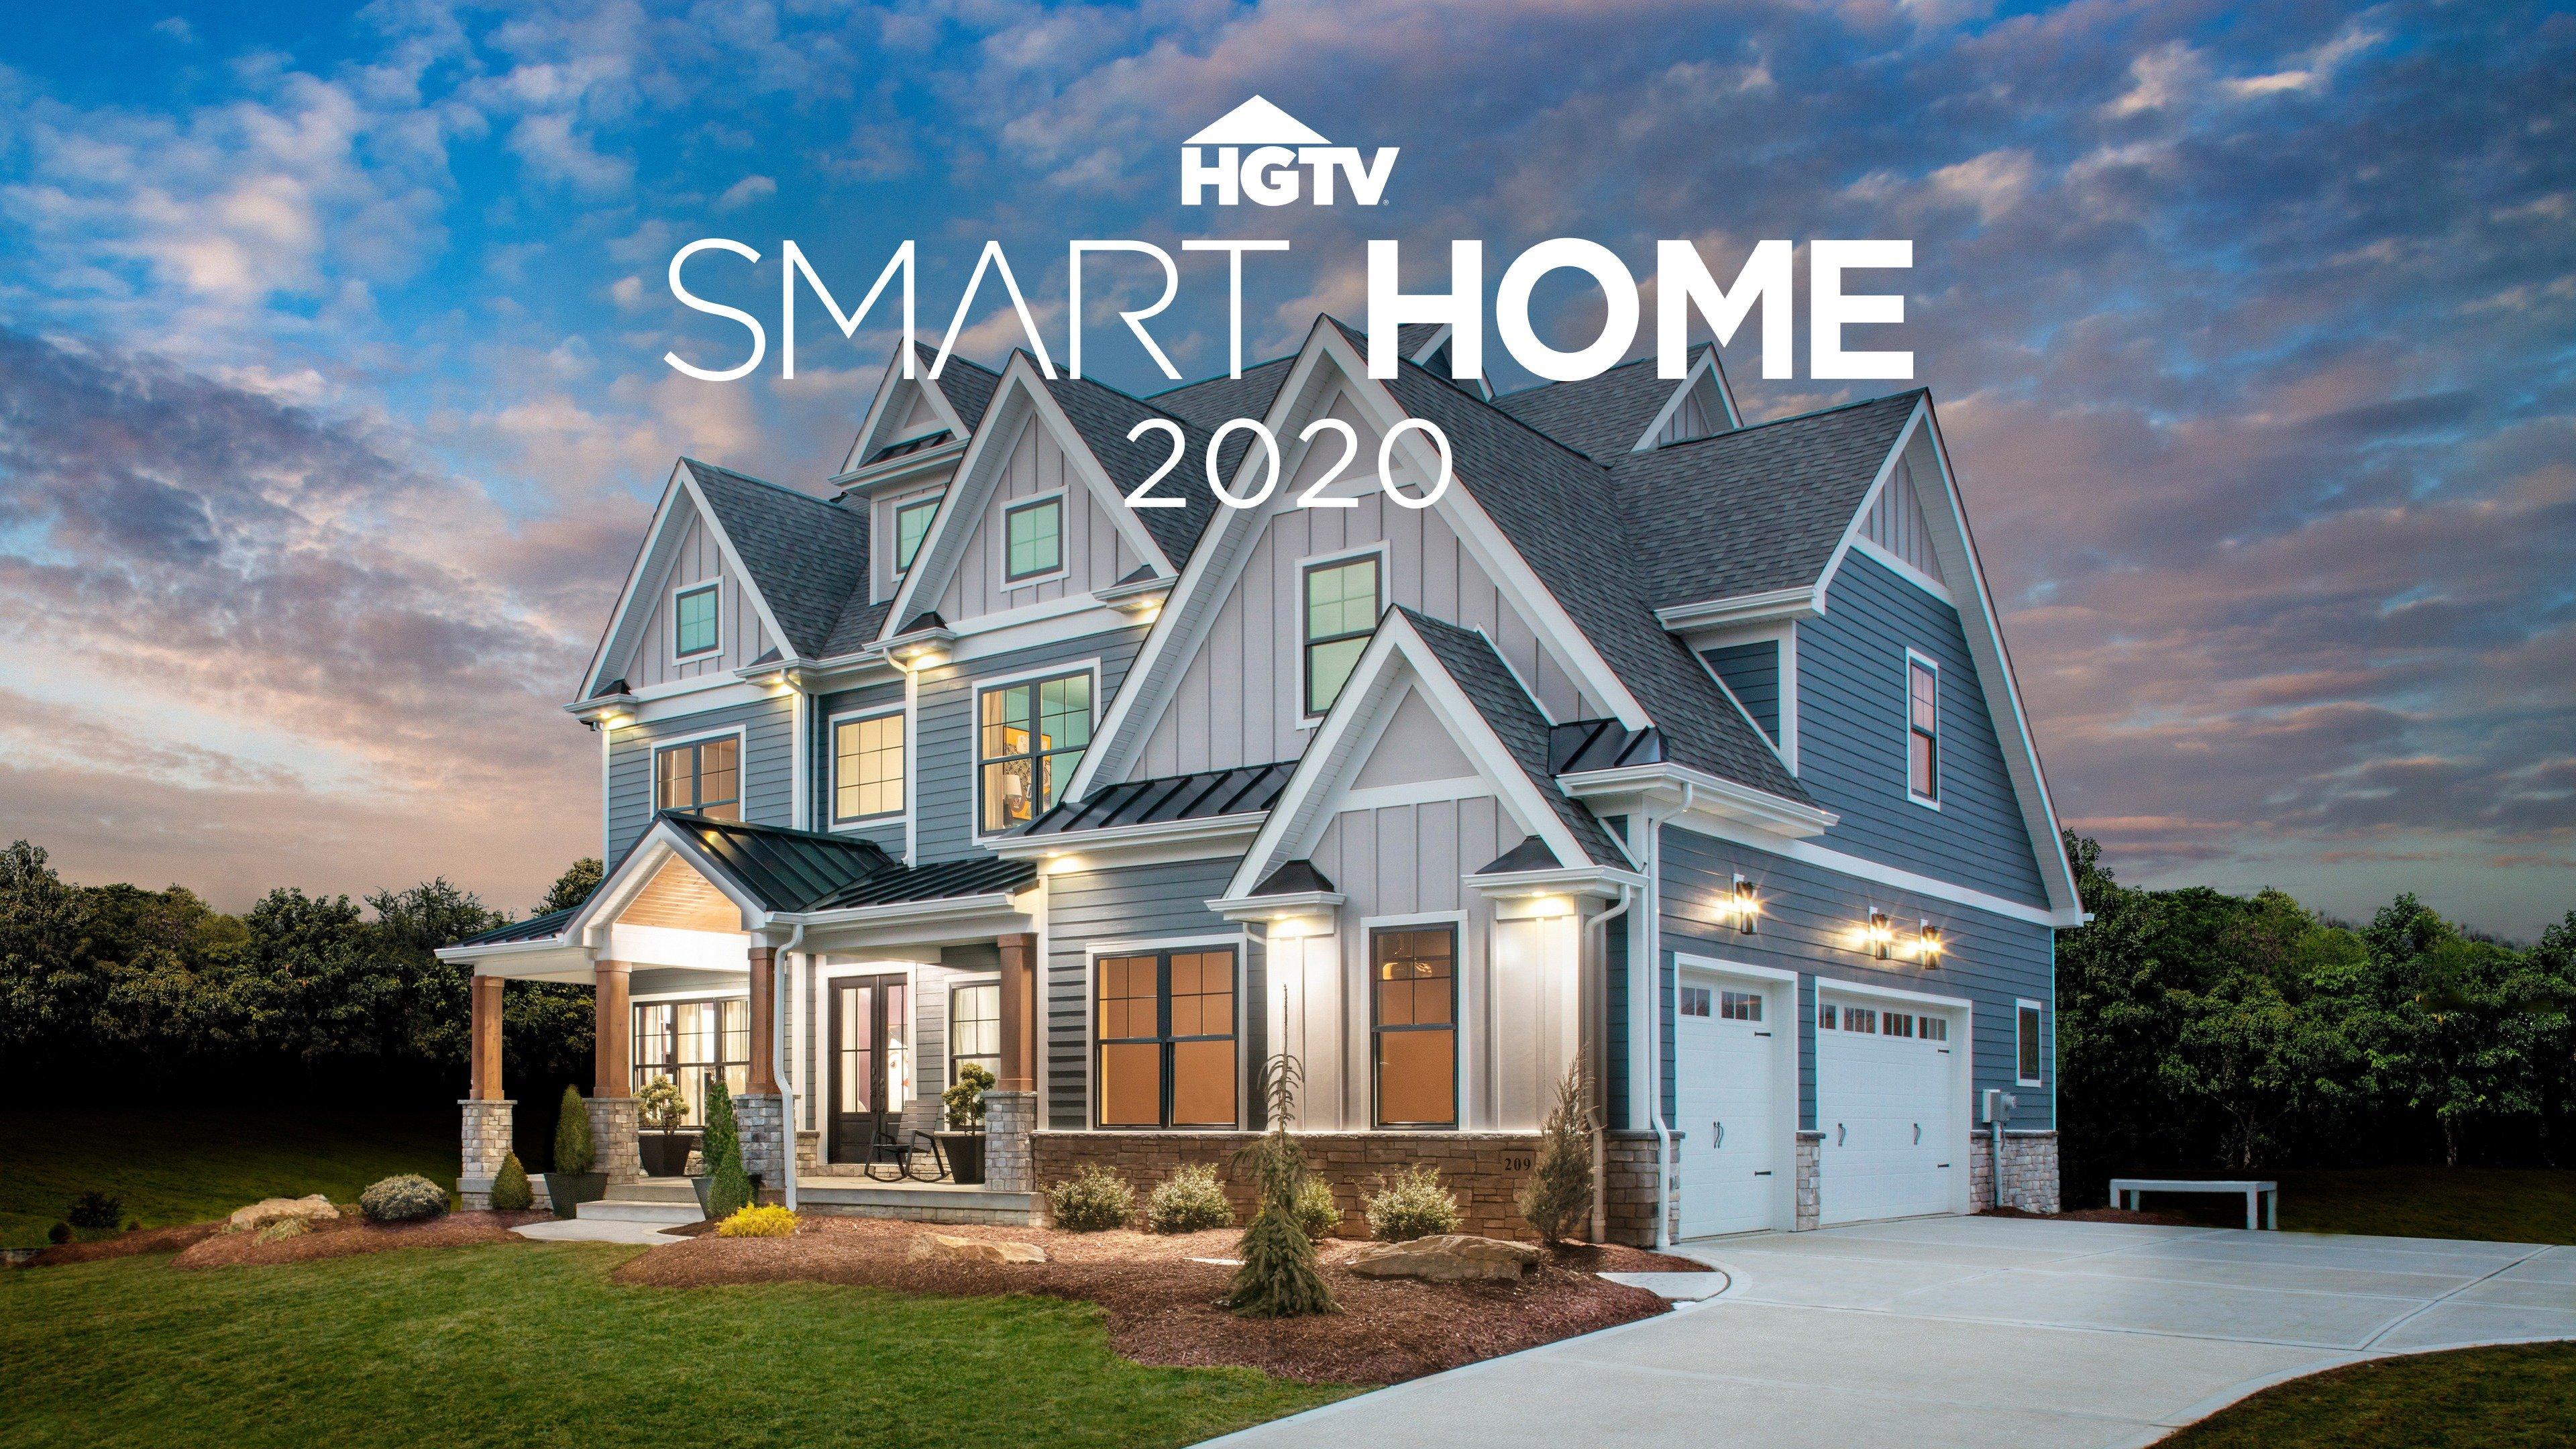 Watch HGTV Smart Home 2020 Streaming Online on Philo (Free Trial)